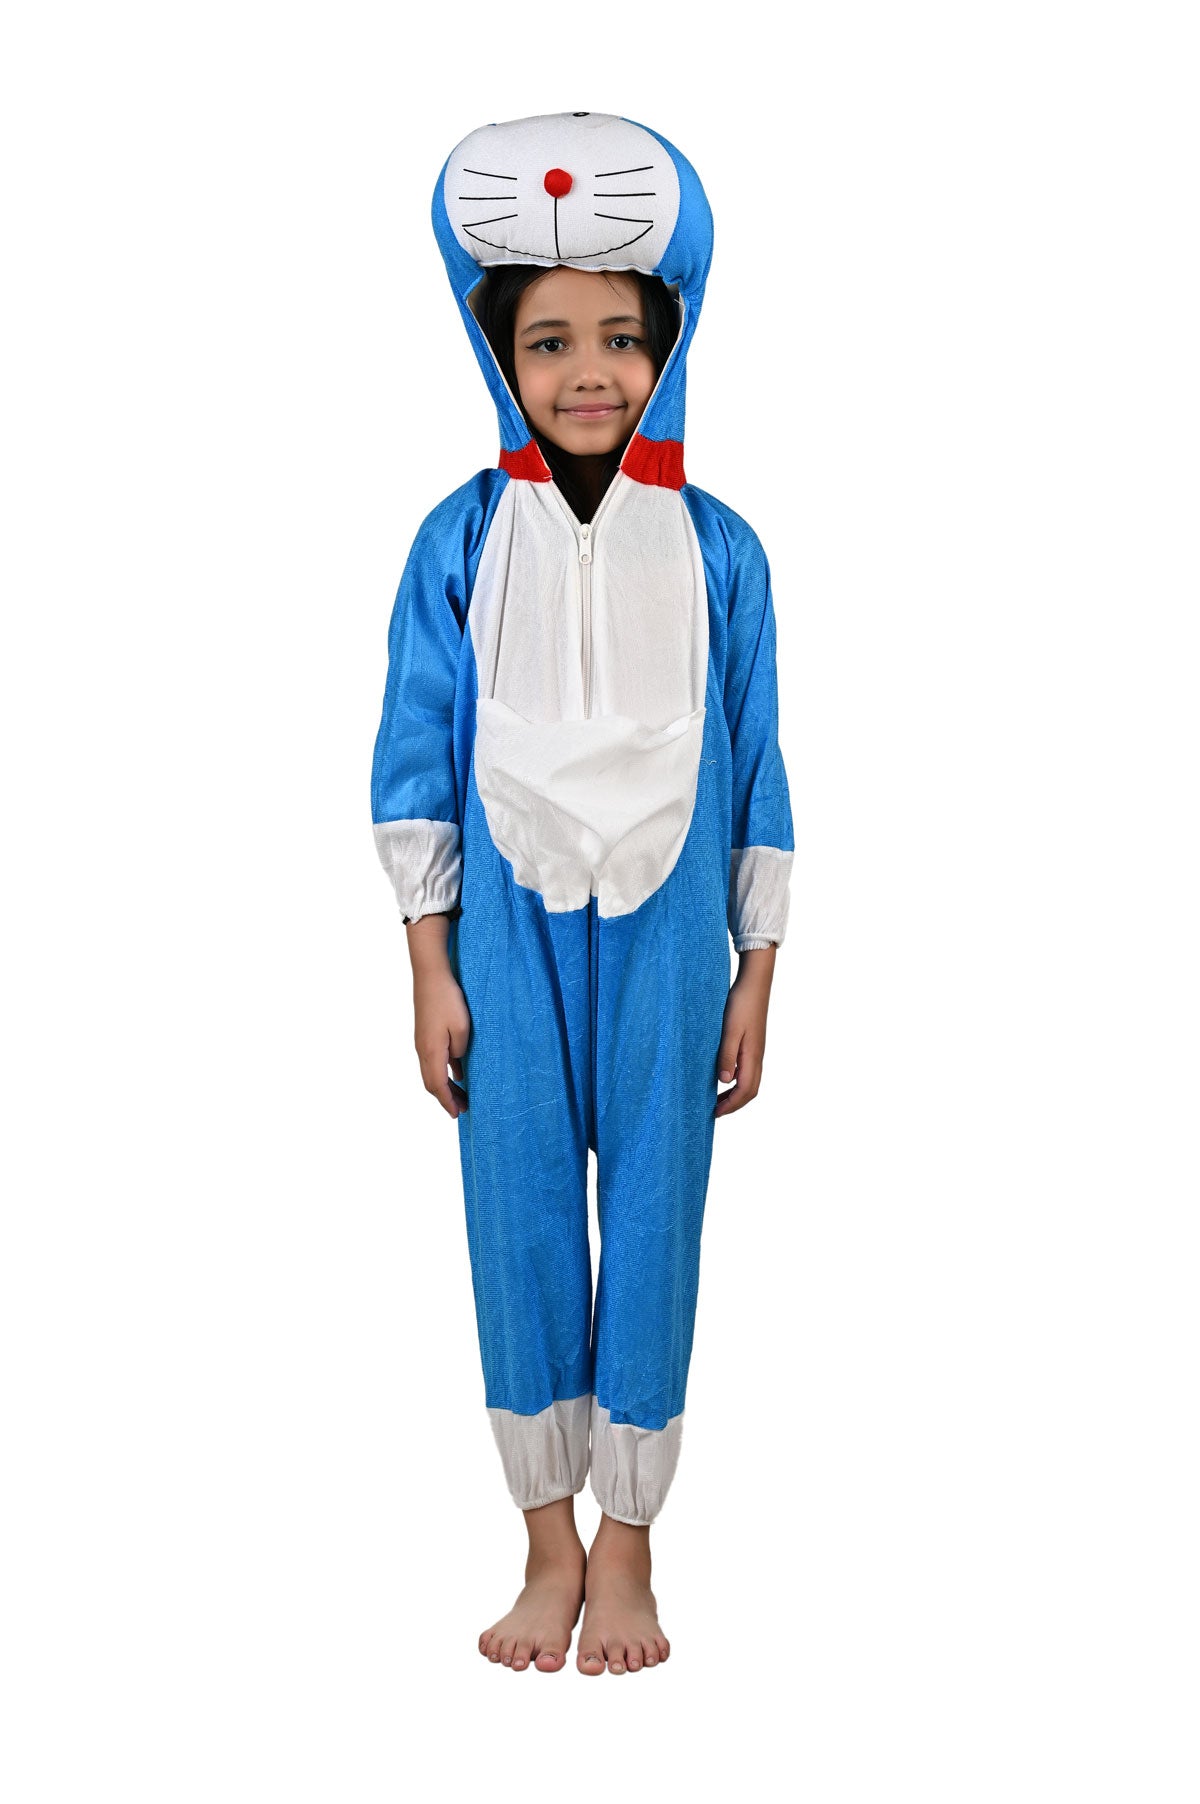 Buy SANSKRITI FANCY DRESSES Shin-Chan Cartoon Fancy Dress Costume Cartoon  Character Dress (XXL) Online at Low Prices in India - Amazon.in